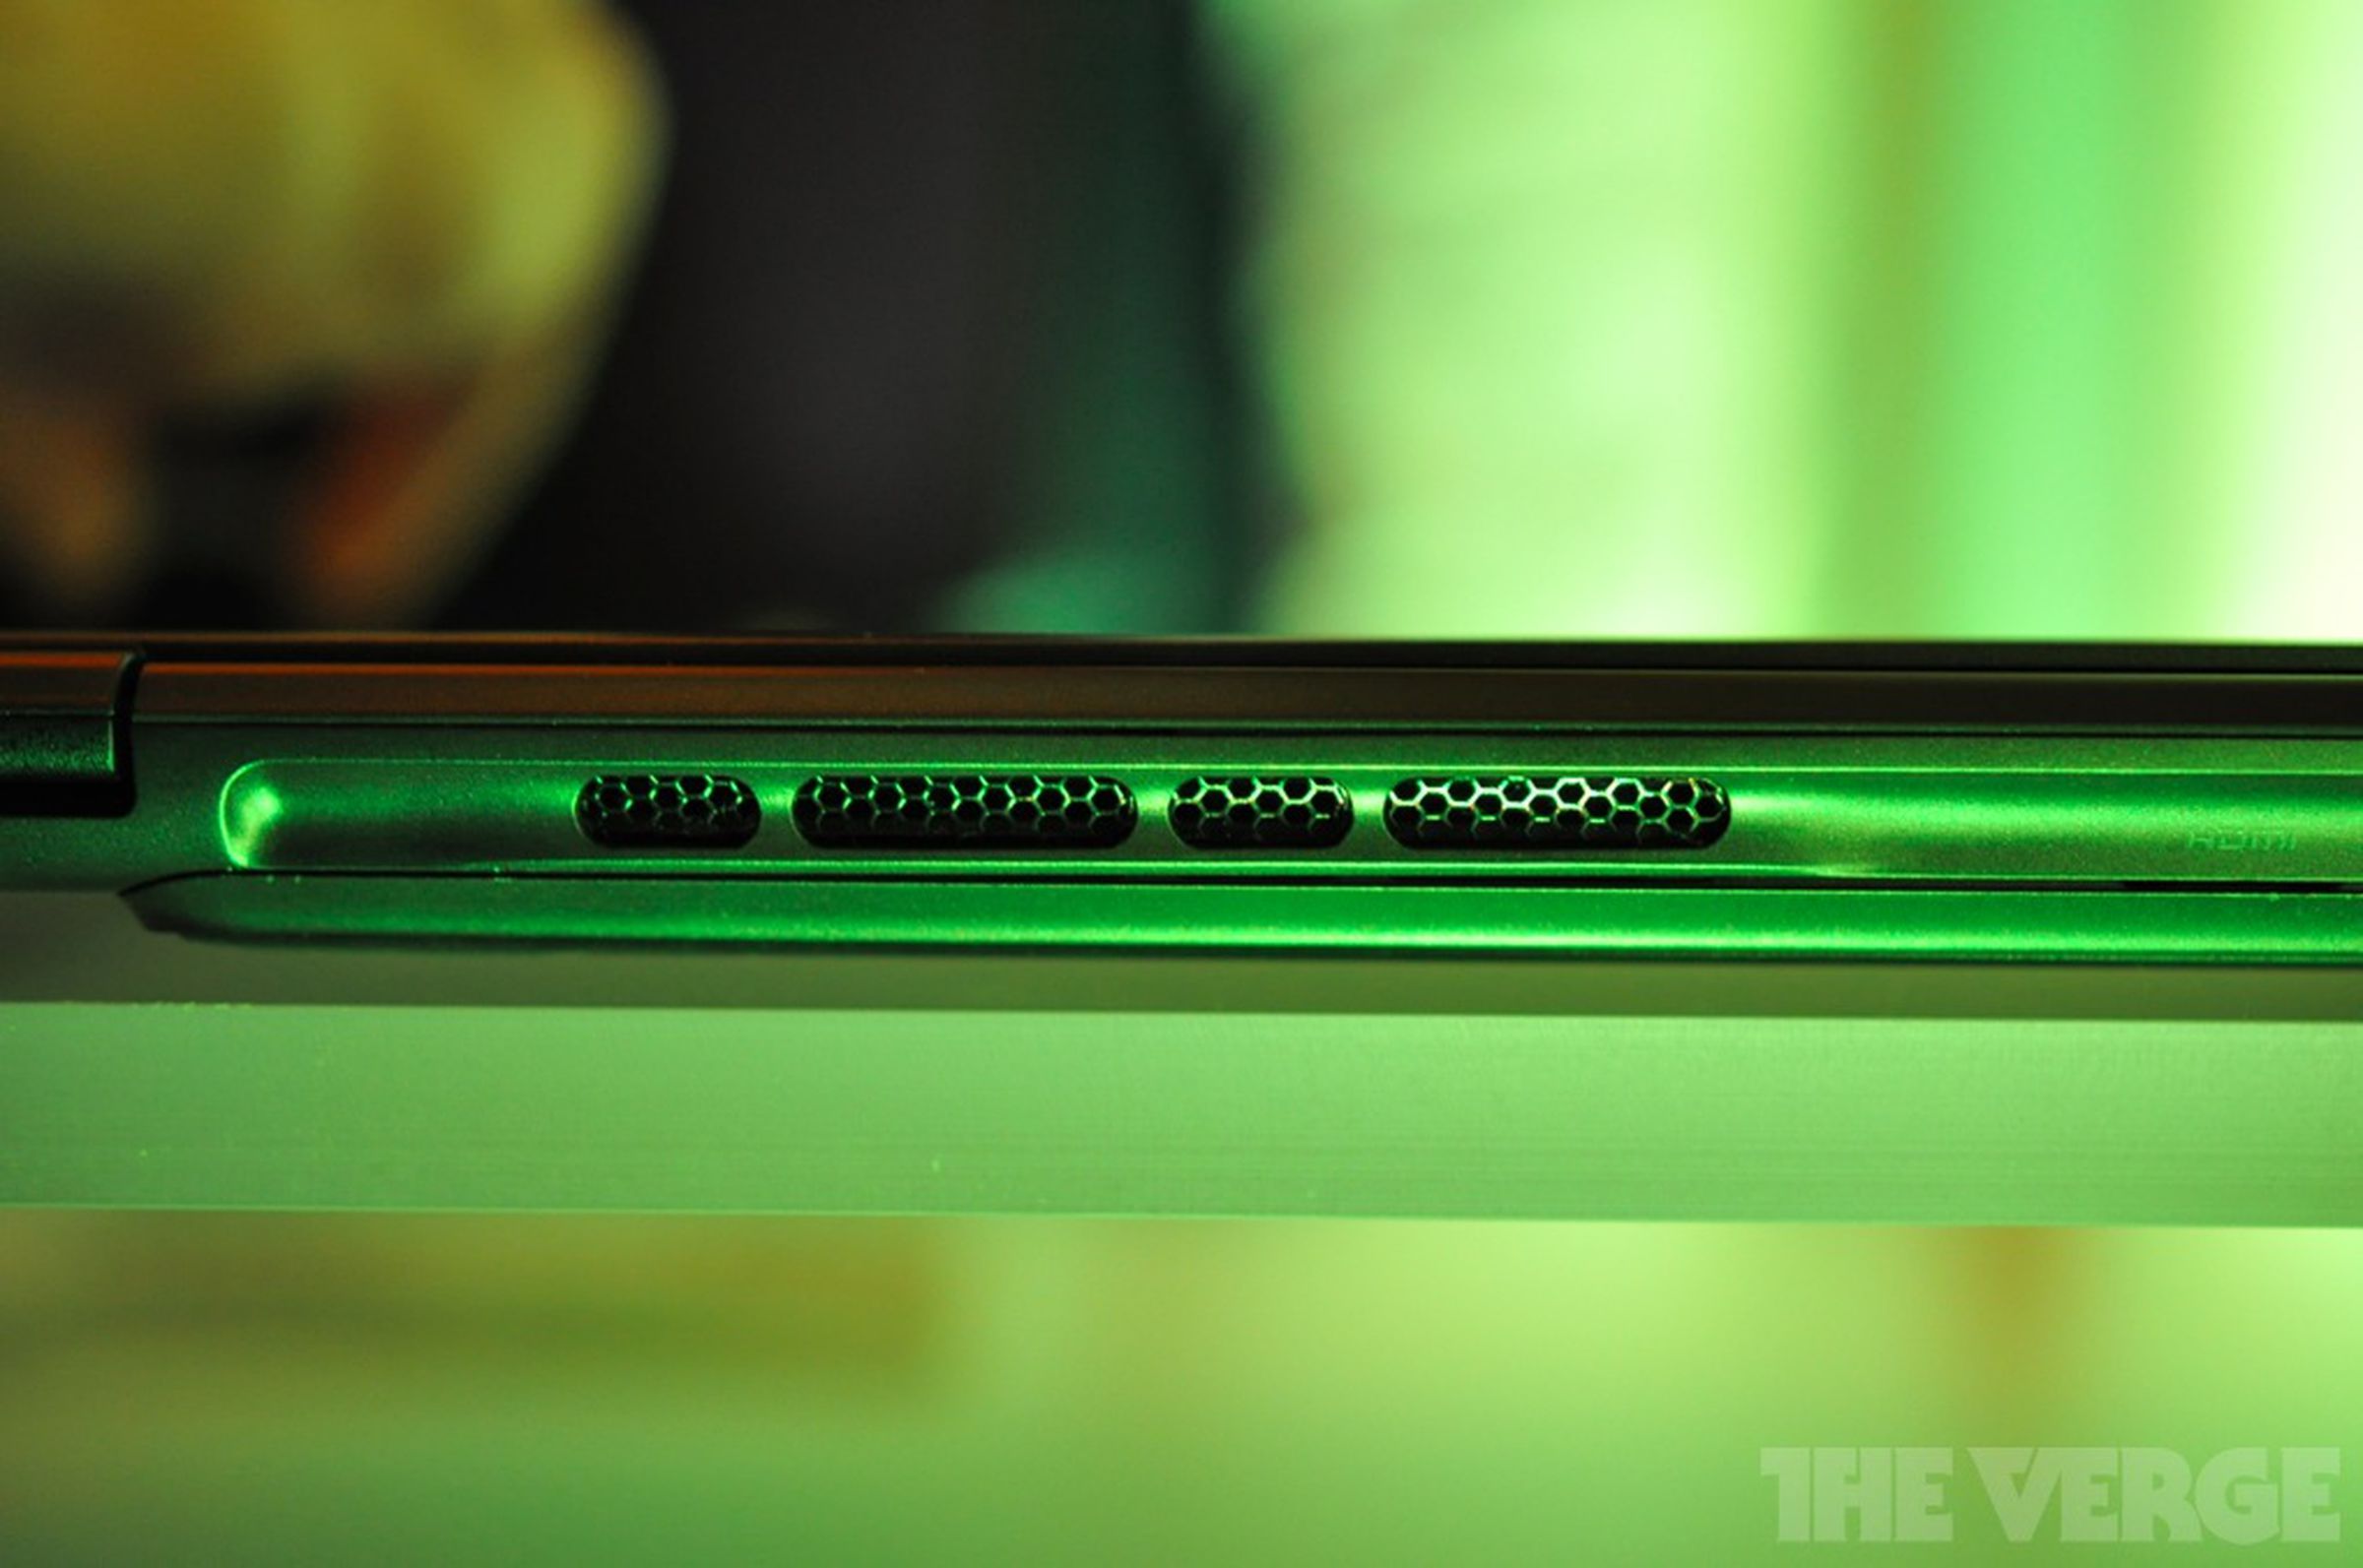 Acer Aspire S5 hands-on photos